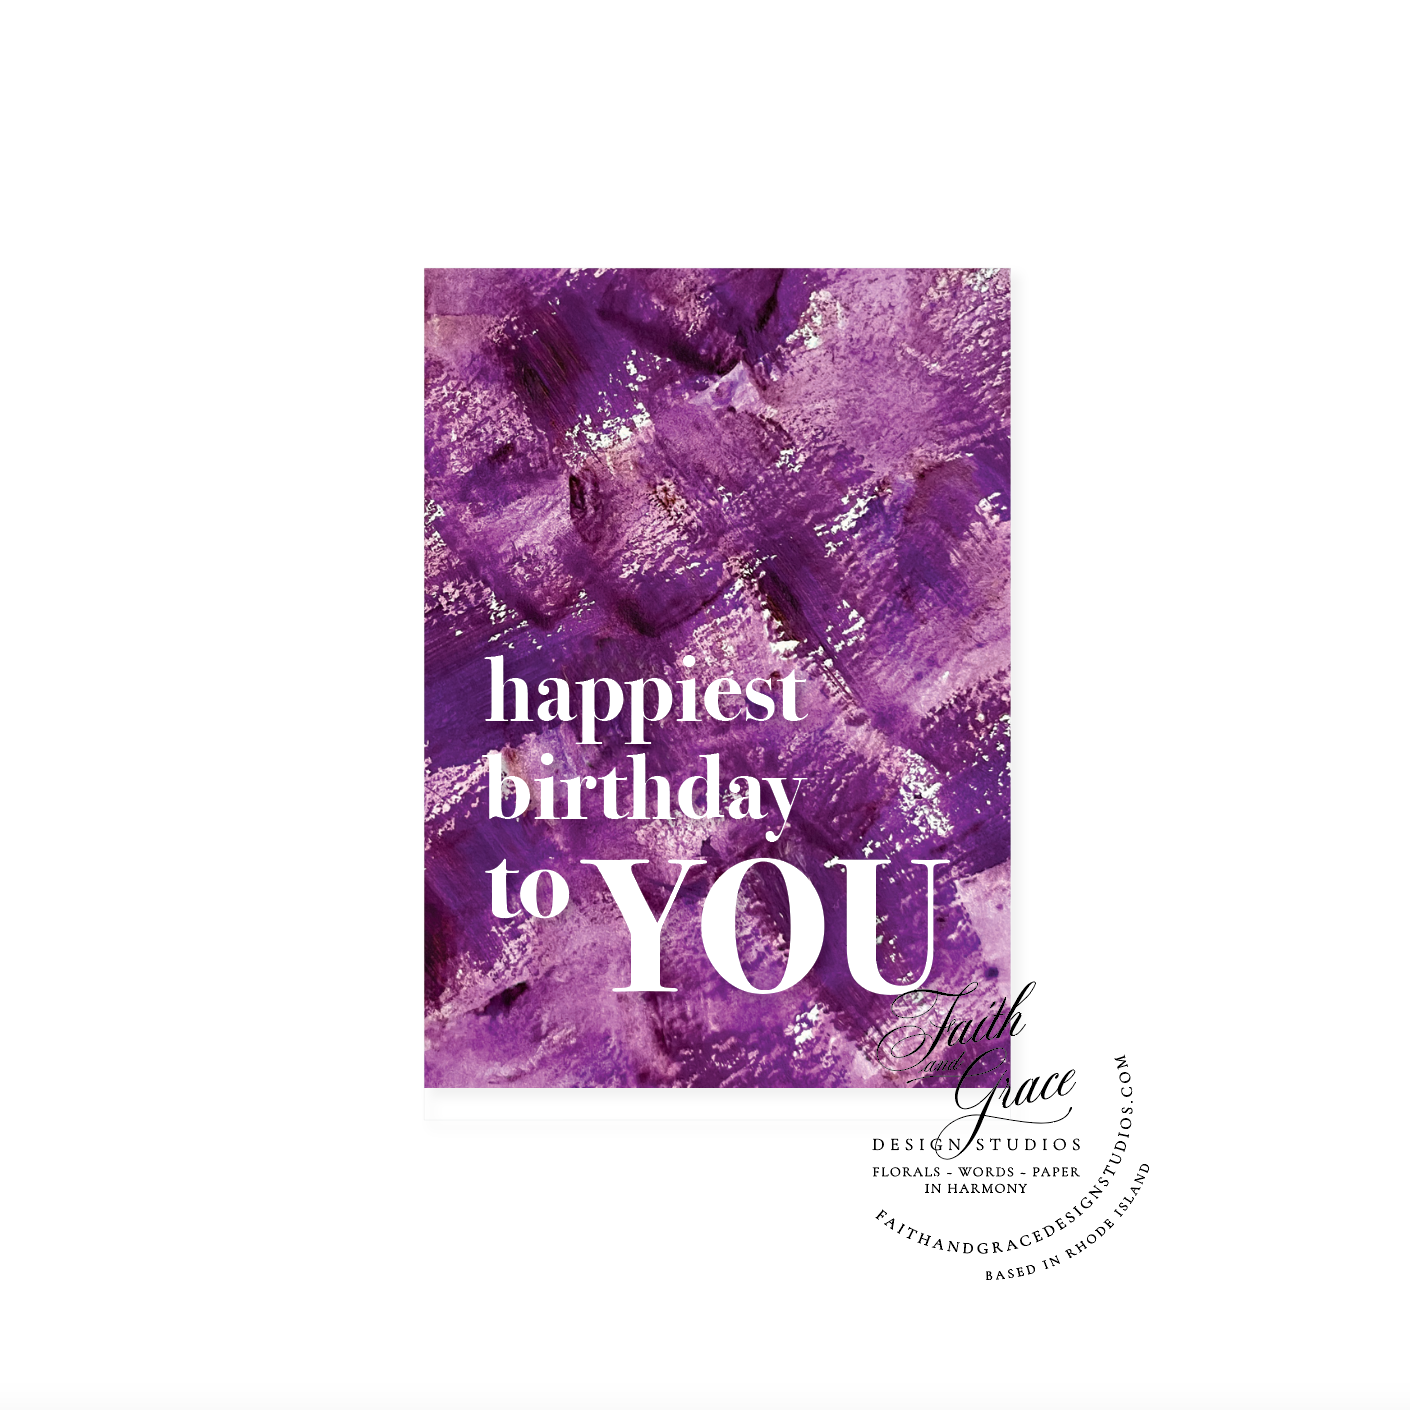 Happiest Birthday to You Greeting Card on magenta purple painted textured felt greeting card